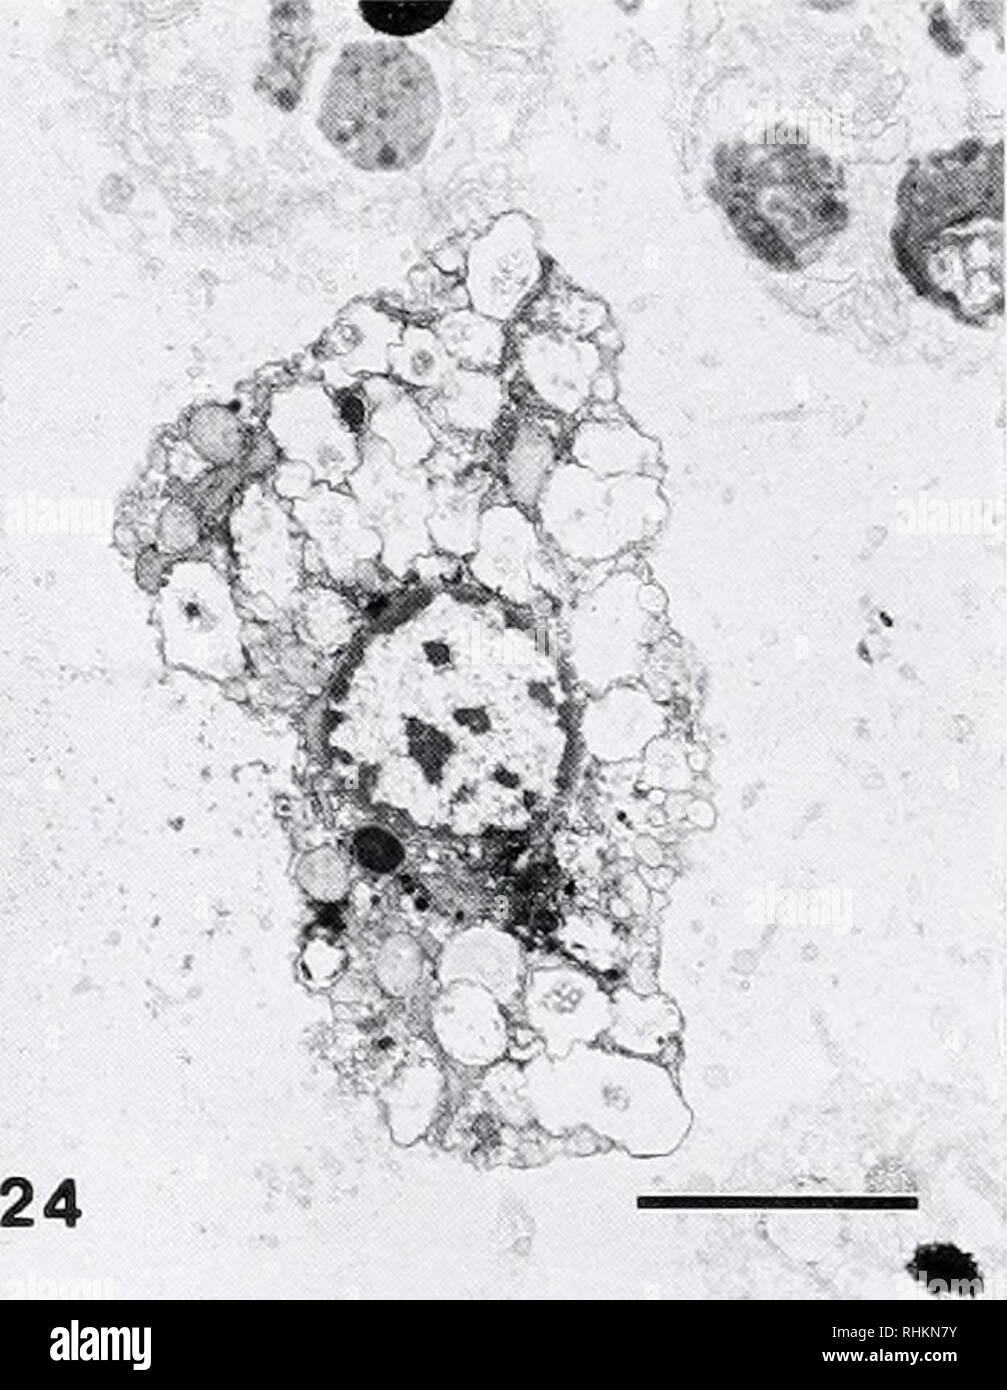 . The Biological bulletin. Biology; Zoology; Biology; Marine Biology. Figure 23. Spicules surrounded by spongin fibers and by discontinuous cytoplasm in the juvenile sponge of Li'iicoxolenia luxti about 72 h after settlement. S: space occupied by a triradiate spicule. Scale bar = I /iin. Figure 24. A vacuolar cell in the mesohyl of the juvenile sponge of Leucosolenia laxa about 72 h after settlement. Scale bar = 2 jum. types may have similar functions, but the bottle cells cannot be named cruciform cells because the former cells are not arranged in each quadrant in a horizontal plane. Vesicula Stock Photo